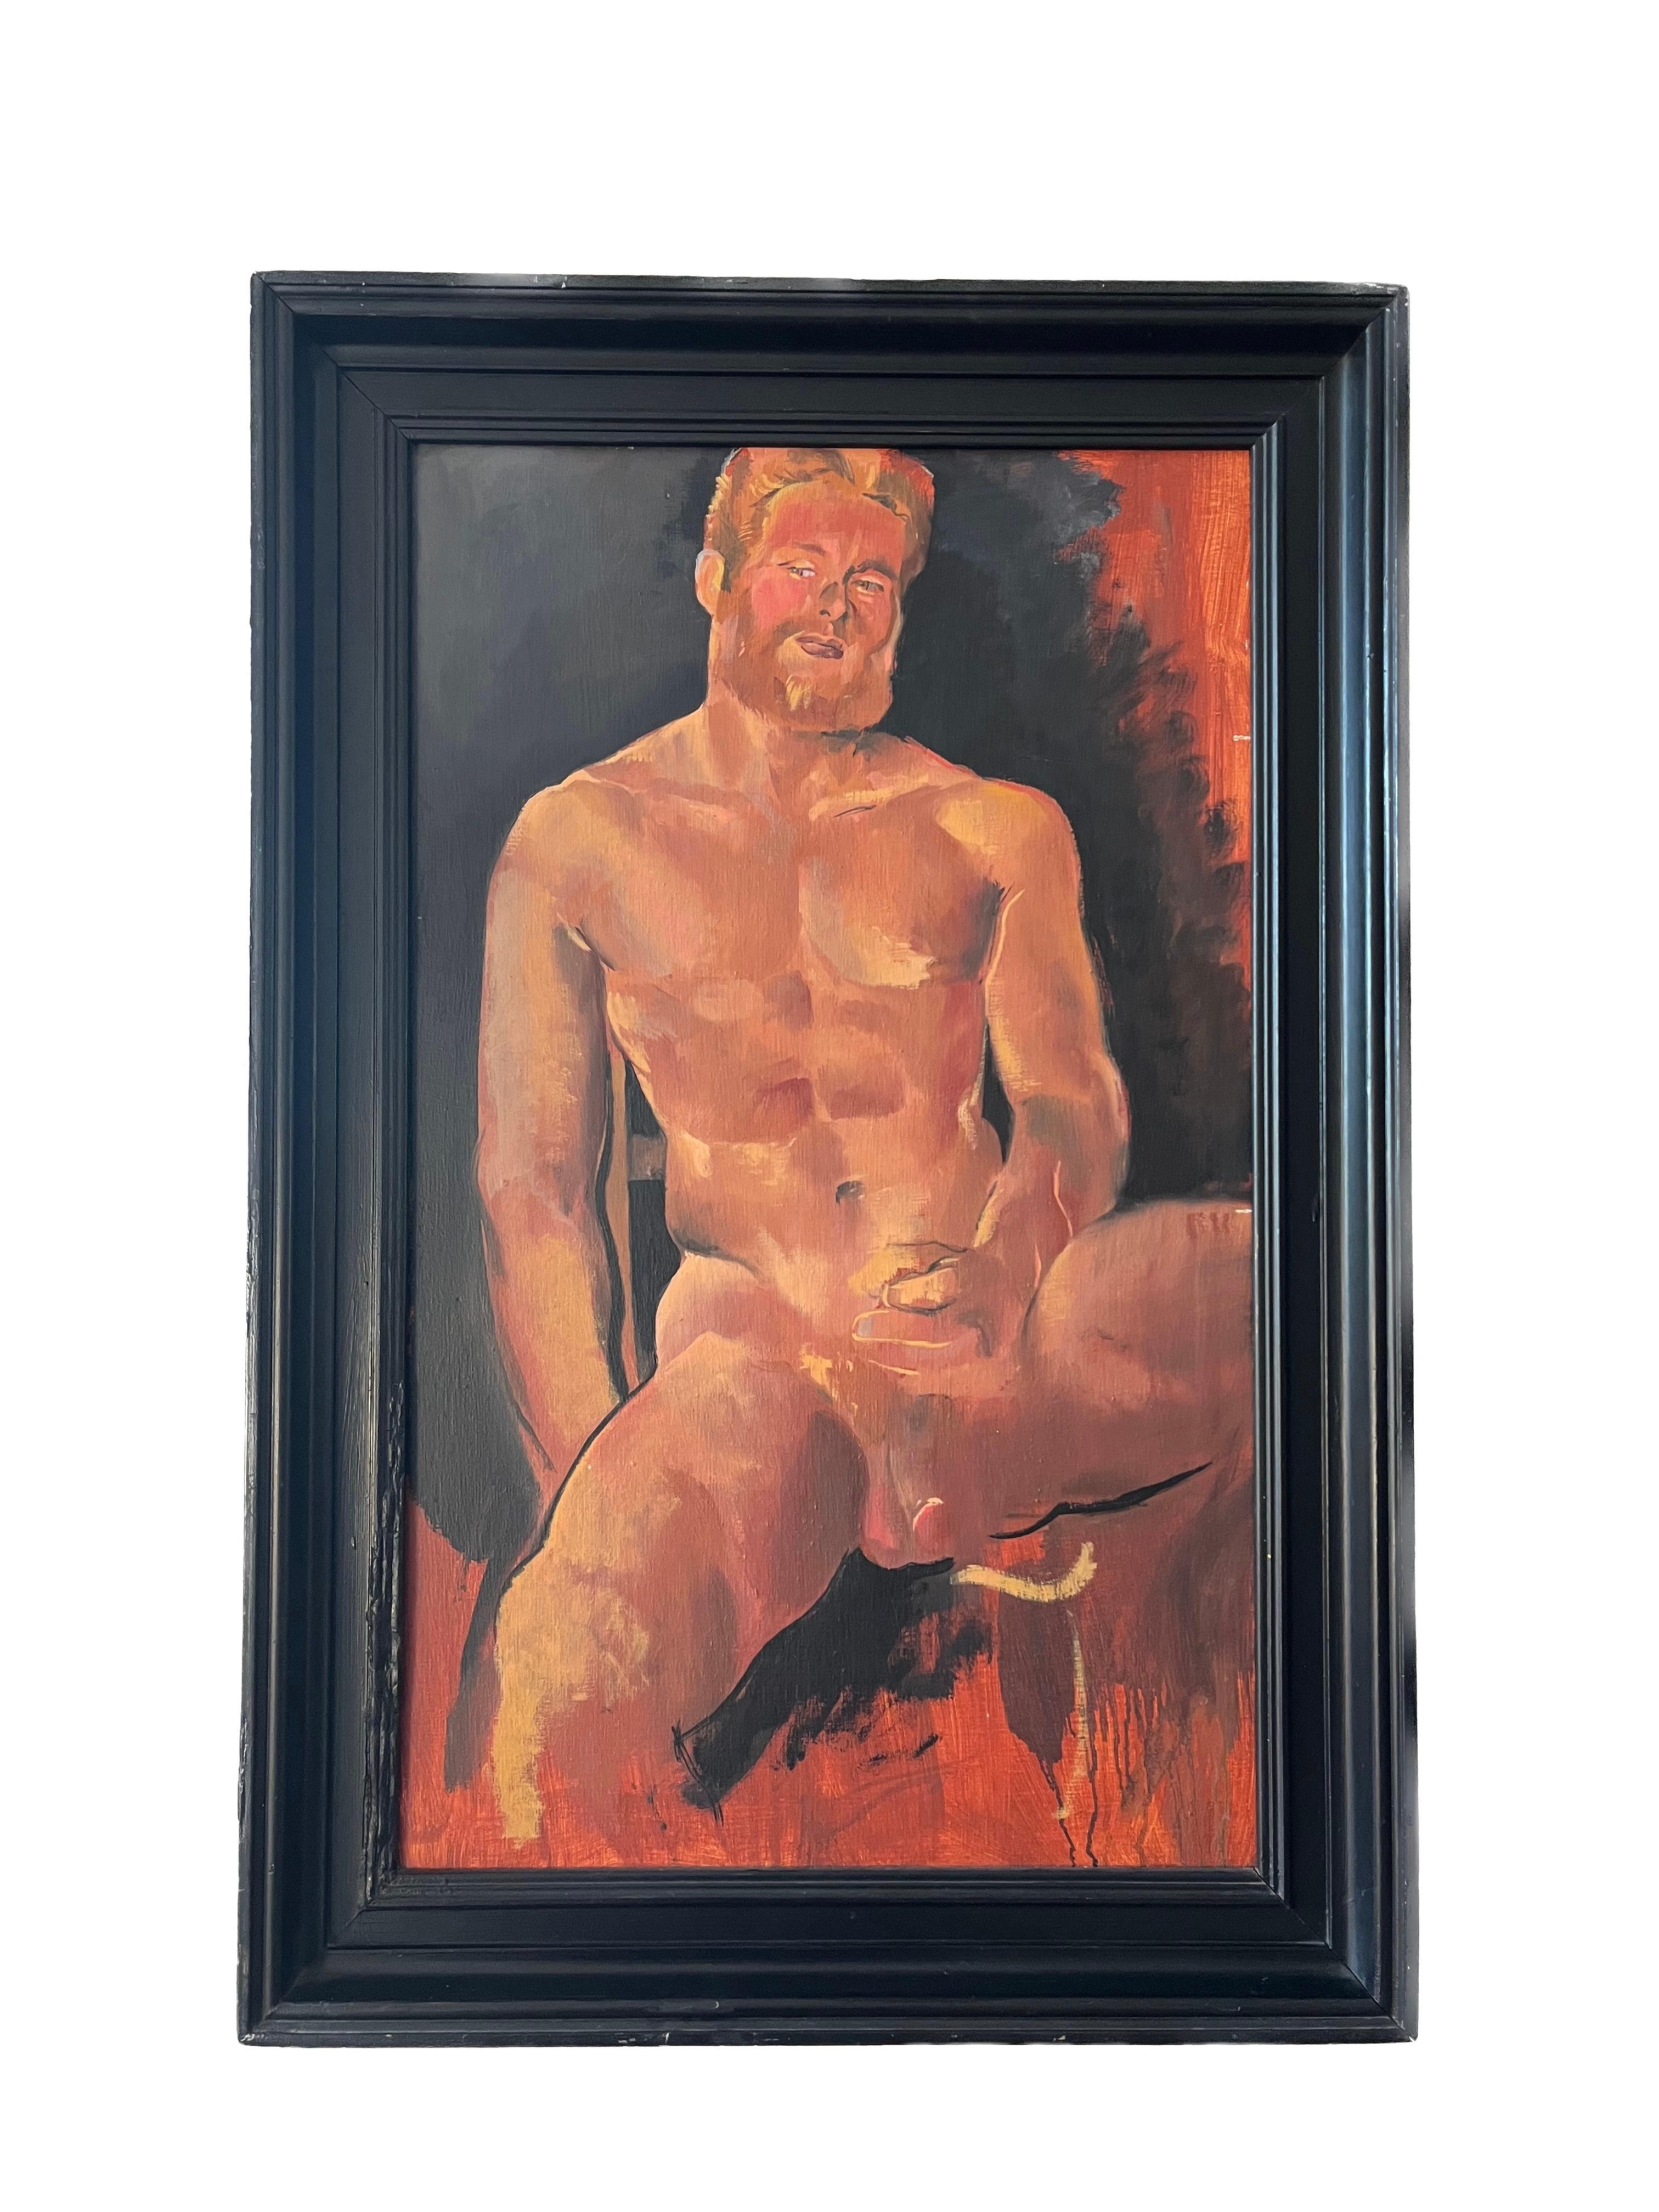 1980s Erotic nude male portrait of artist's lover, Iconic piece from gay history - Painting by Philip Core